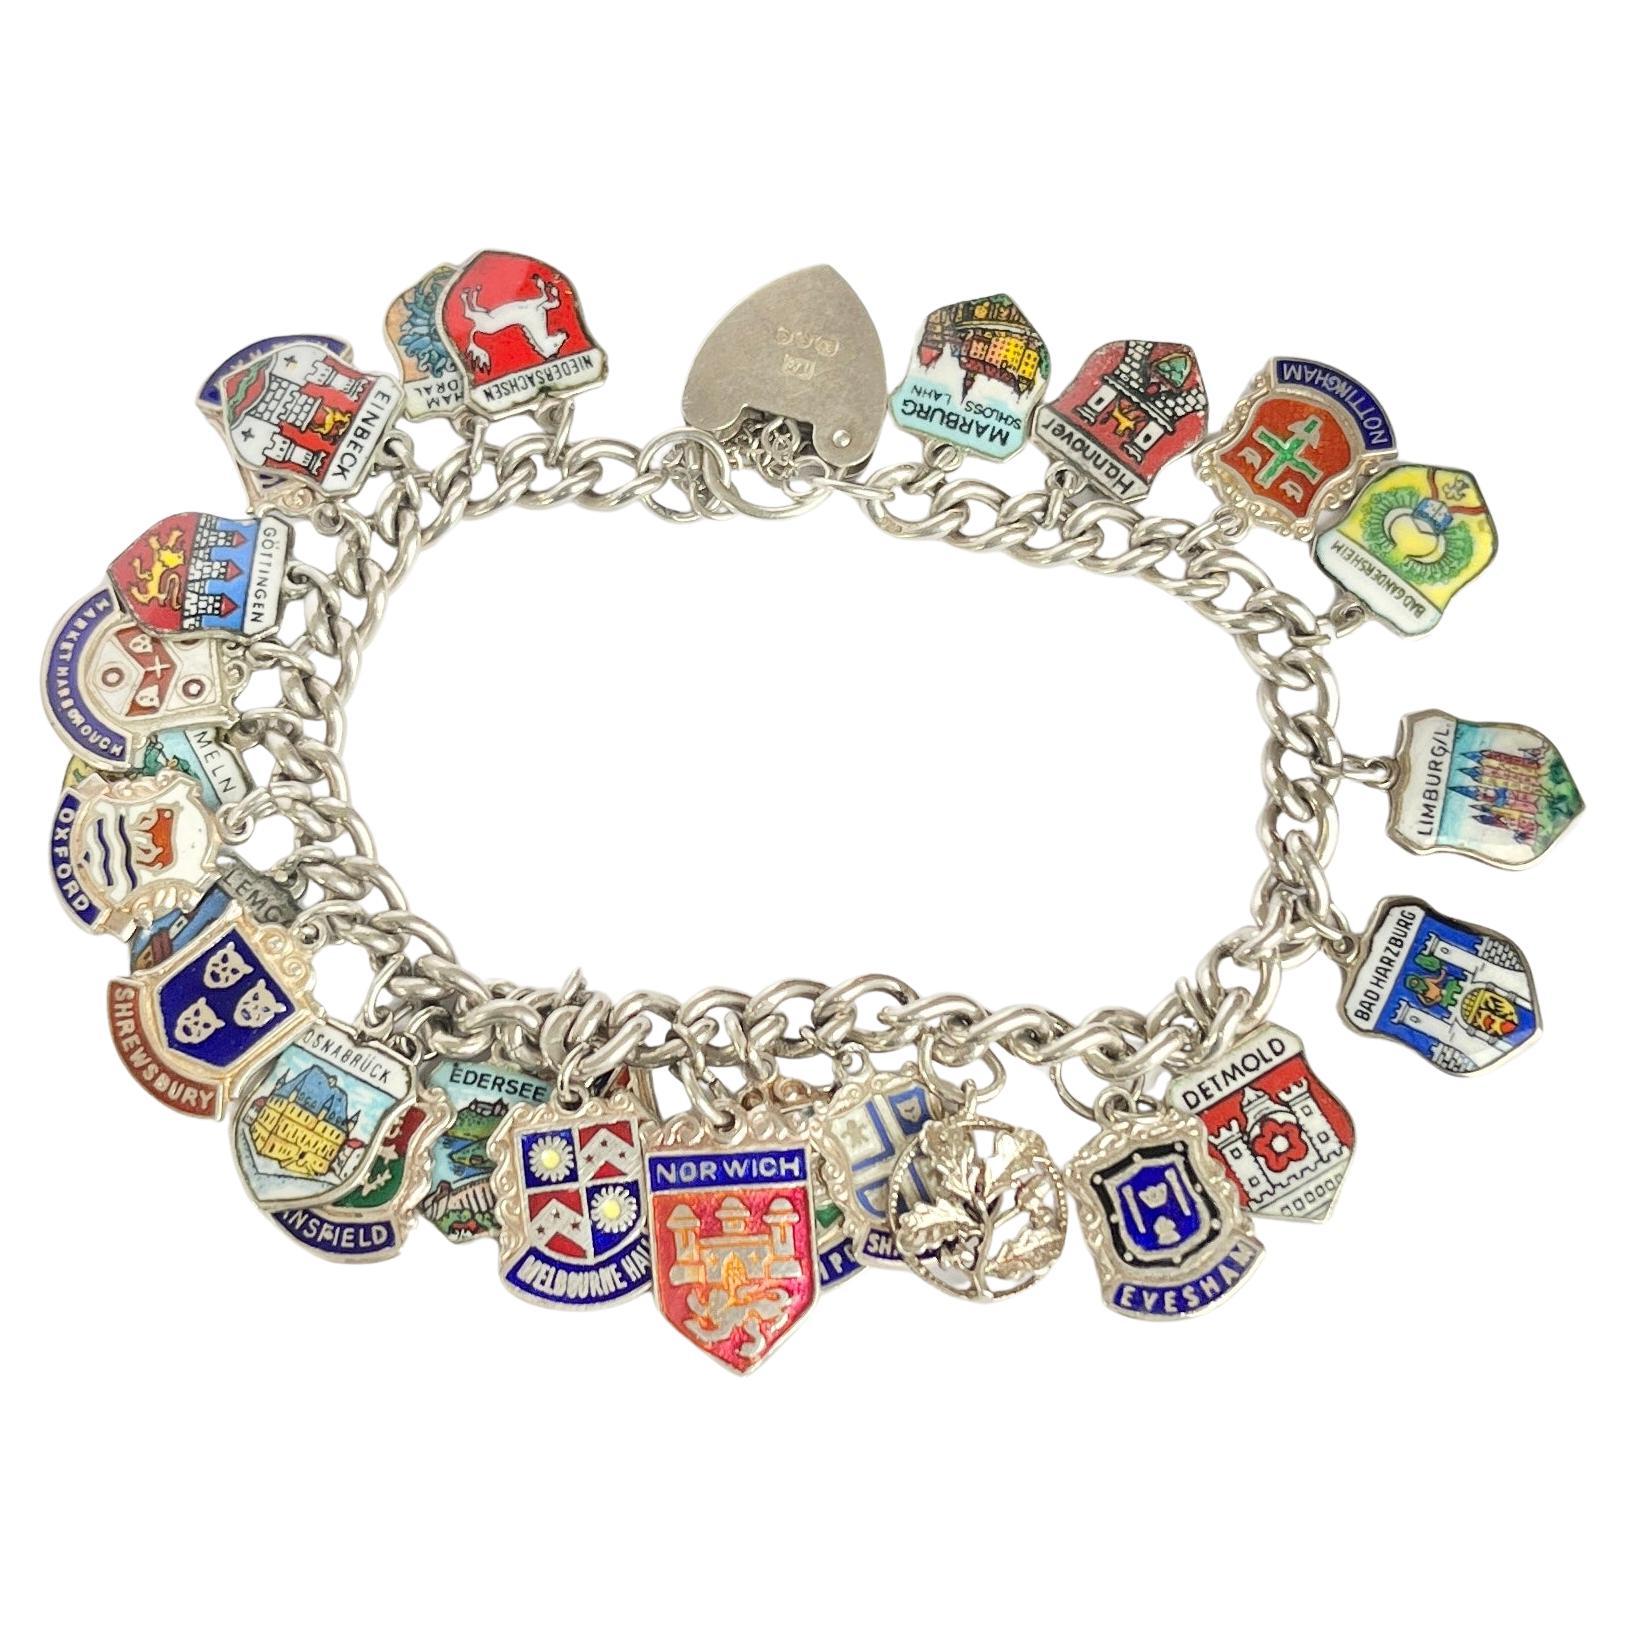 Antique Silver Bracelet With City Shield Charms For Sale